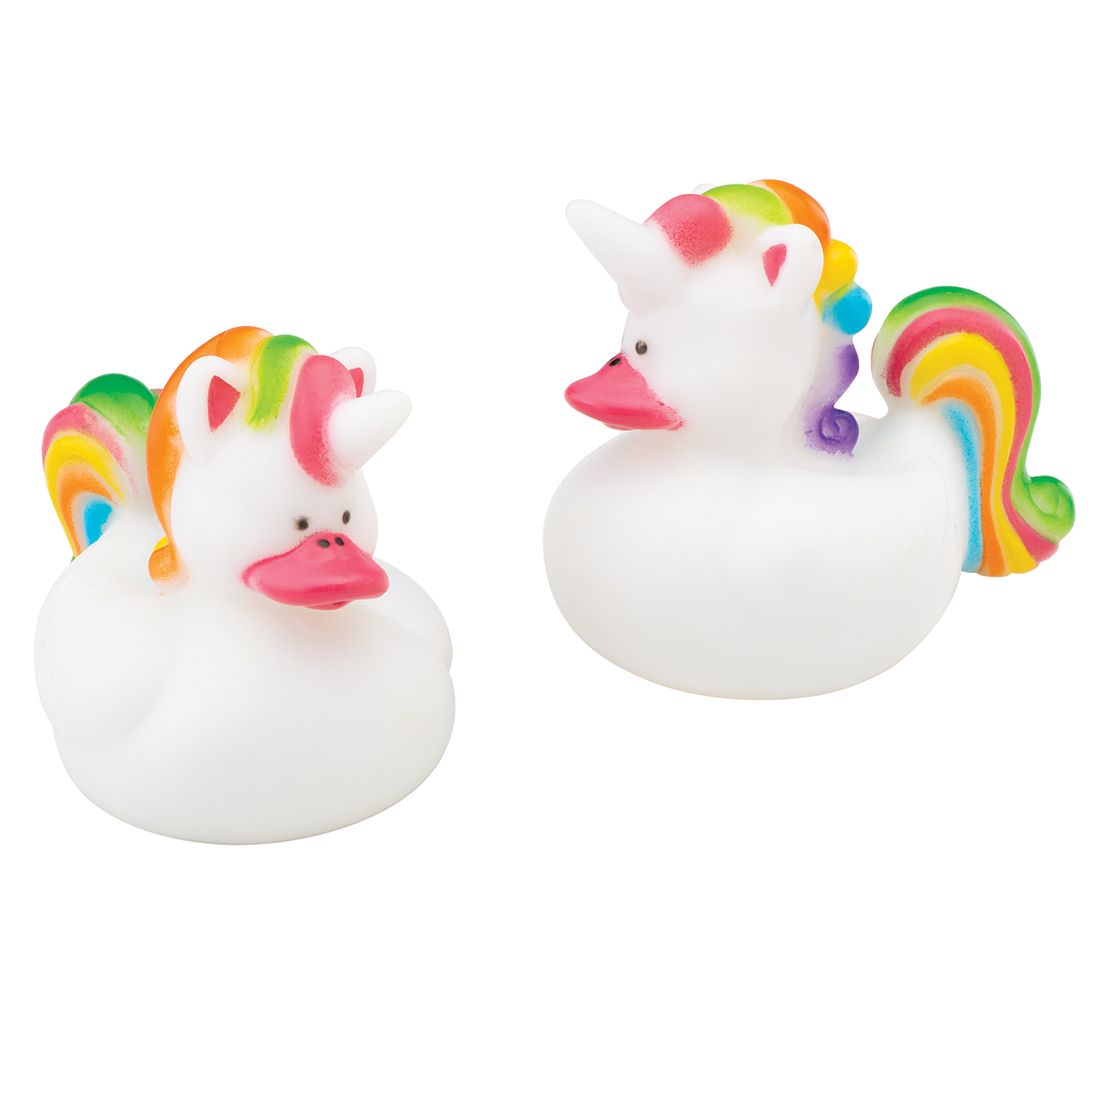 JUST FOR FUN - UNICORN RUBBER DUCK - TOY2435